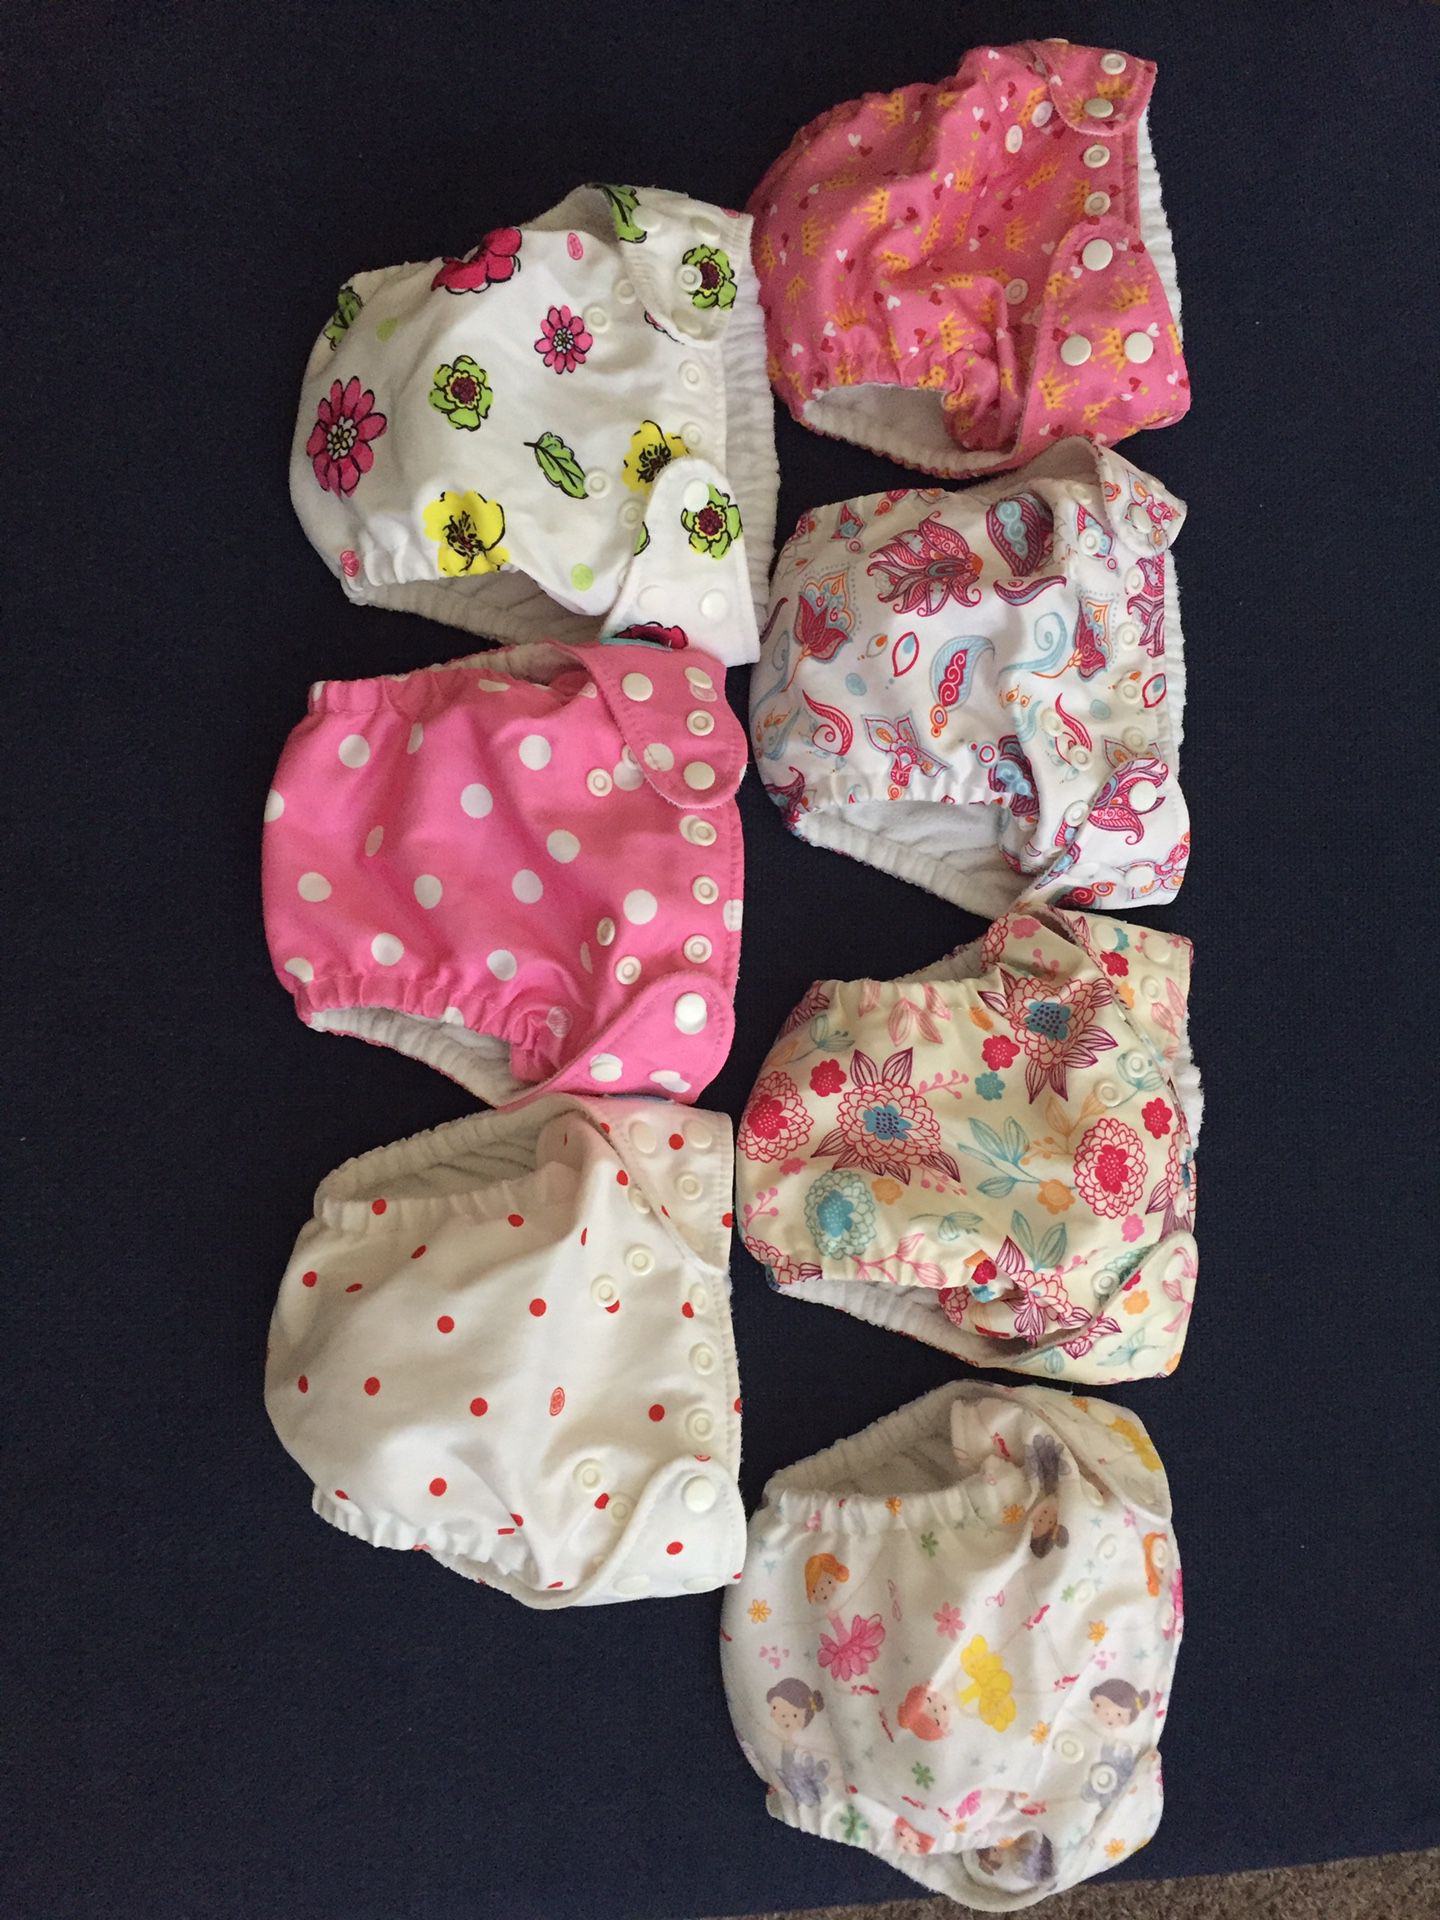 Charlie Banana One Size Cloth Diapers